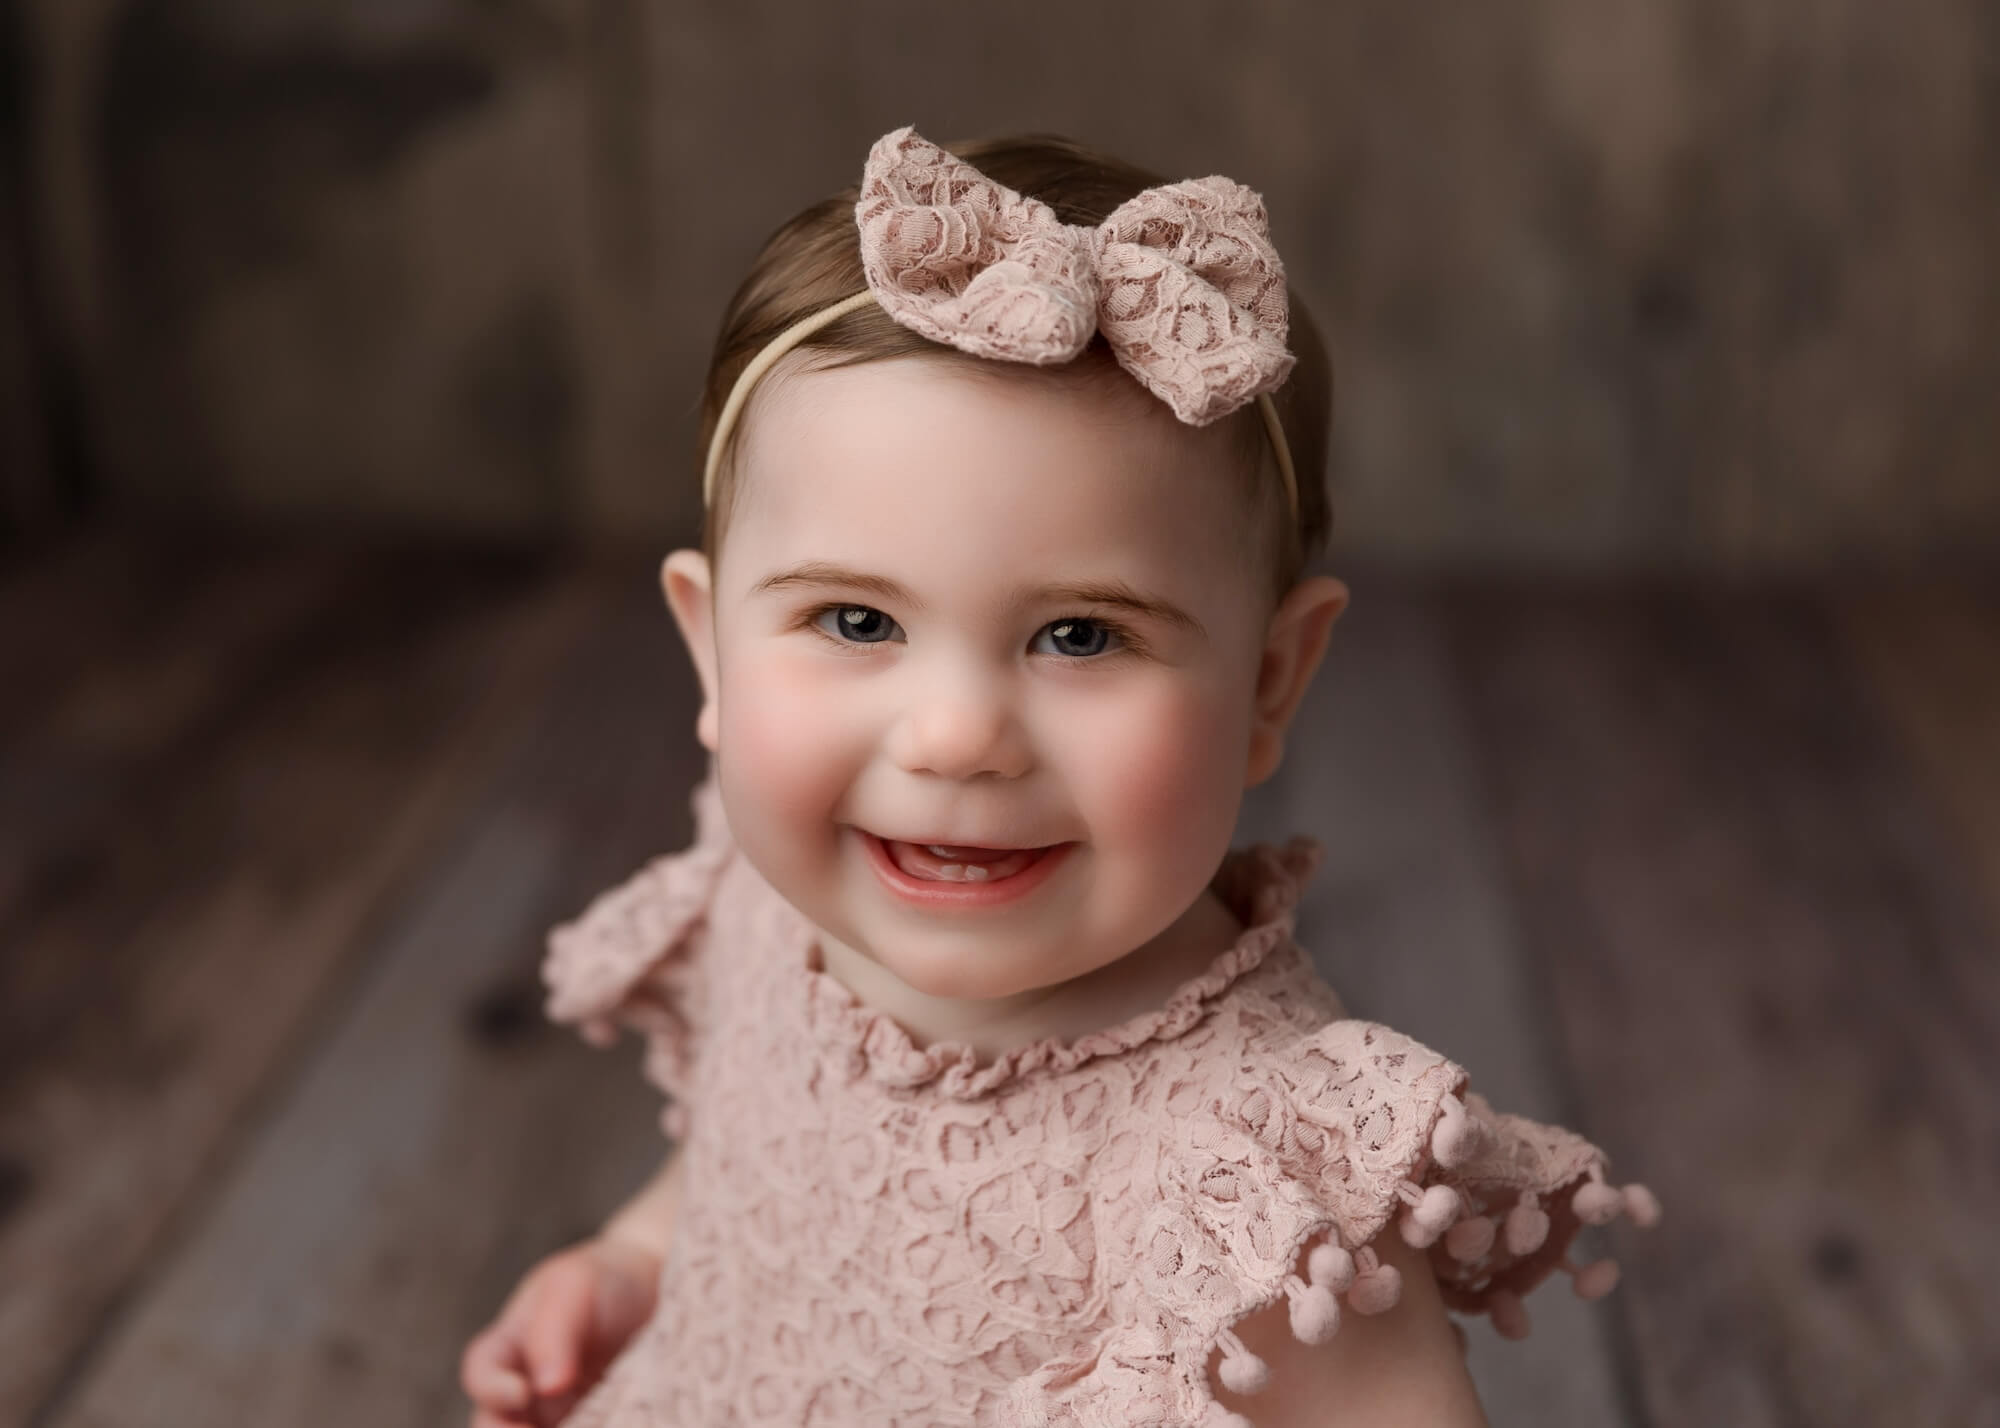 baby photographer Boston MA, milestone portraits near me, baby photography in Boston, baby photography packages